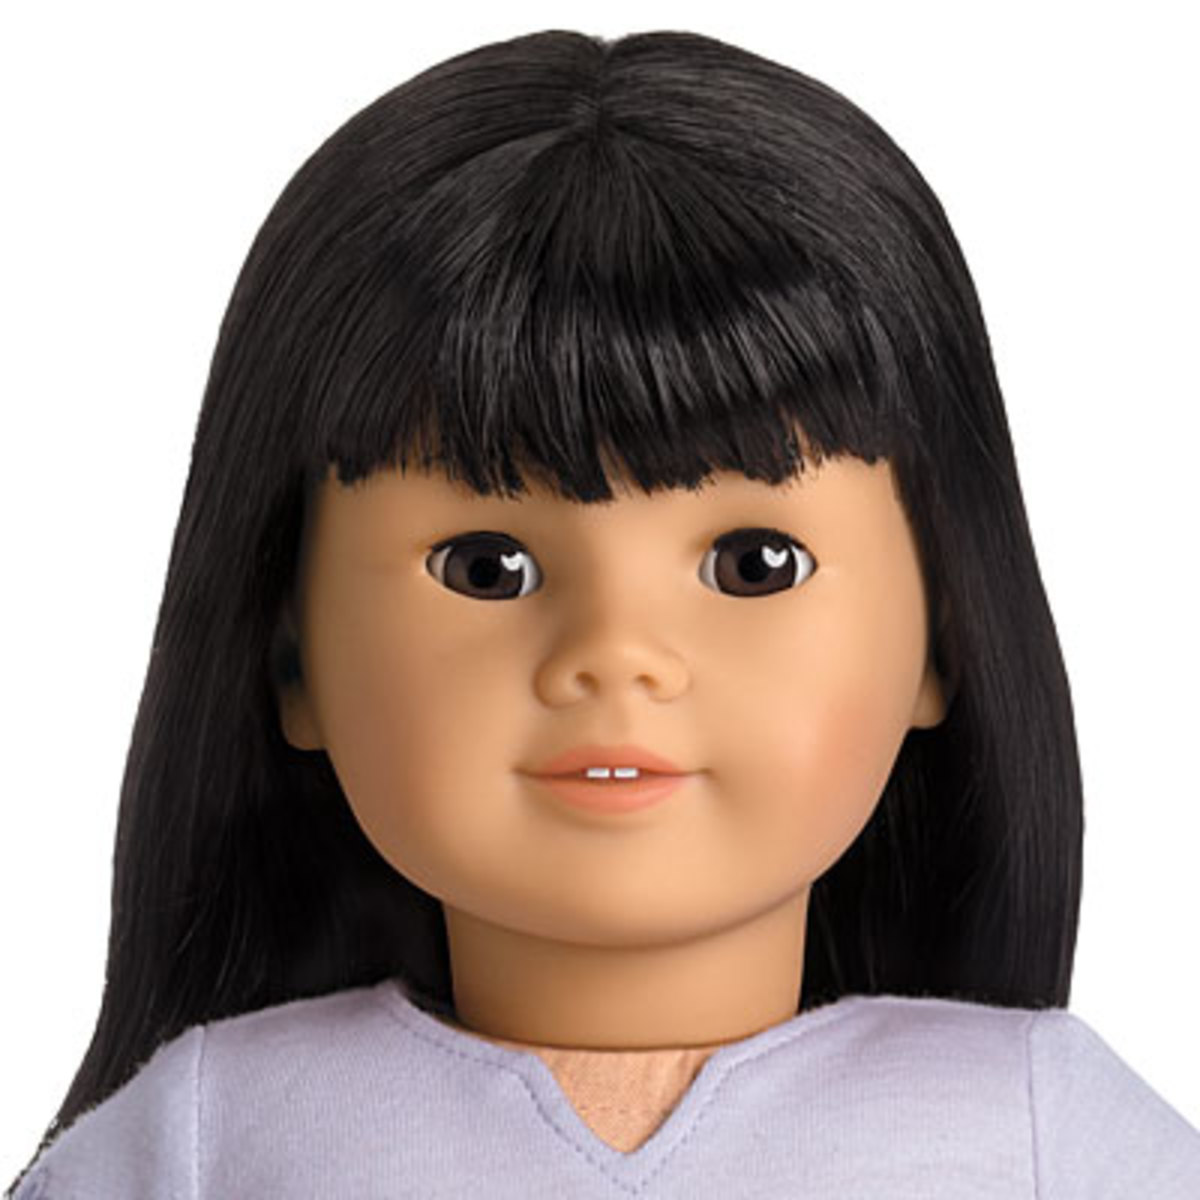 Why We Need the Asian Face Mold Back for American Girl Dolls